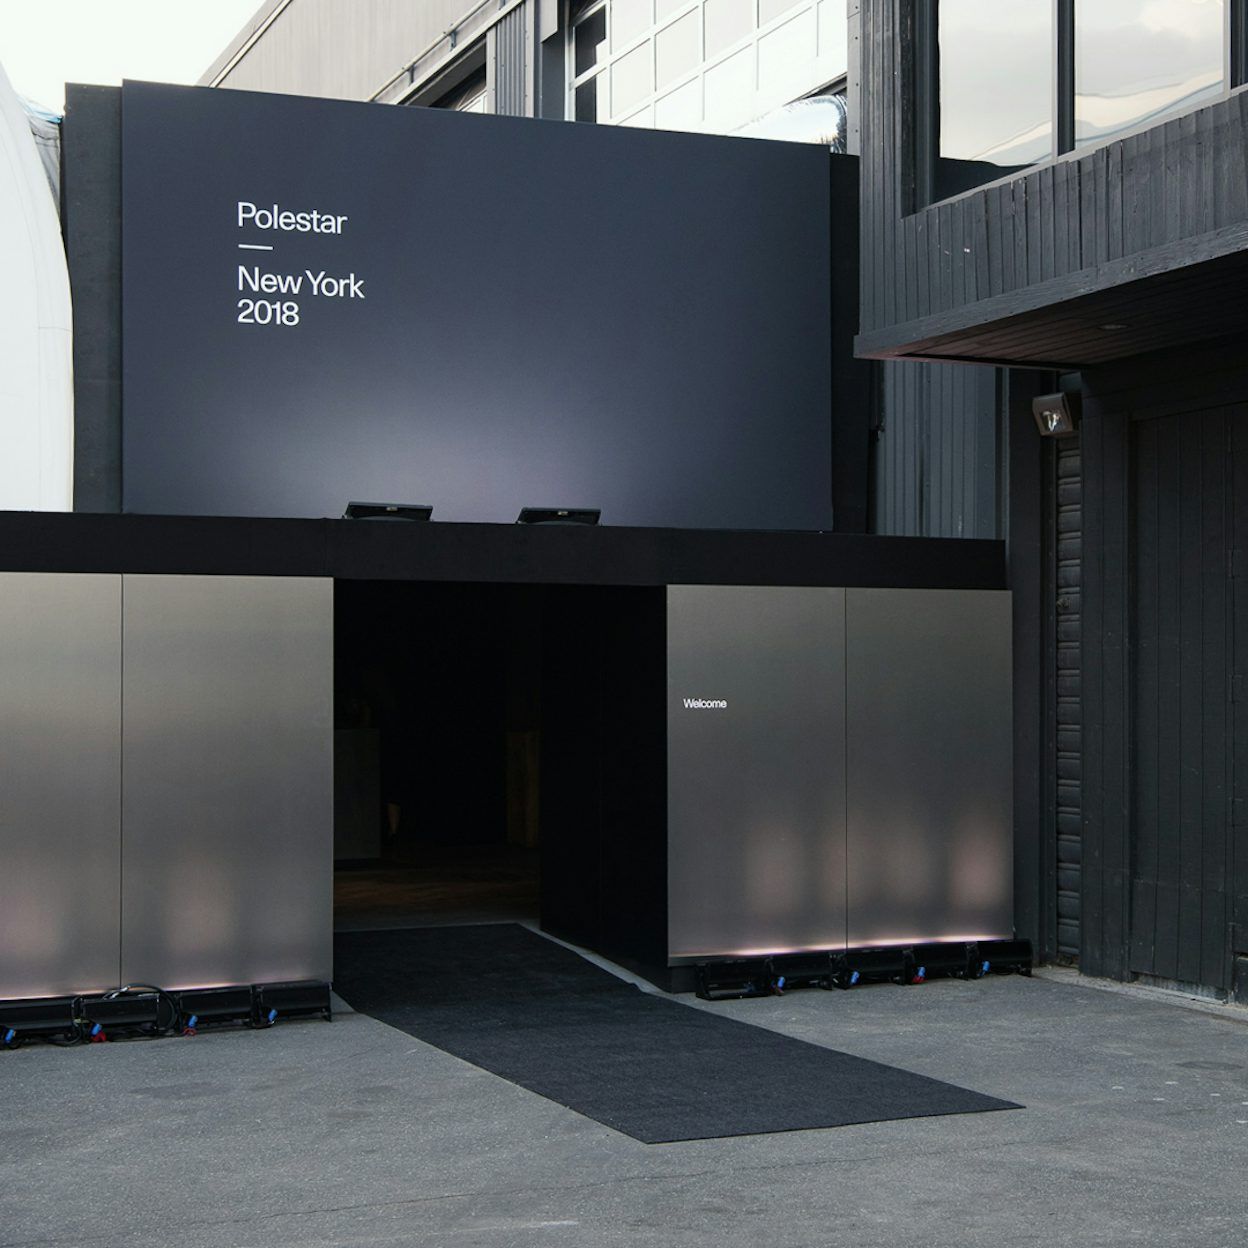 The entrance to a building with a sign that reads Polestar New York 2018